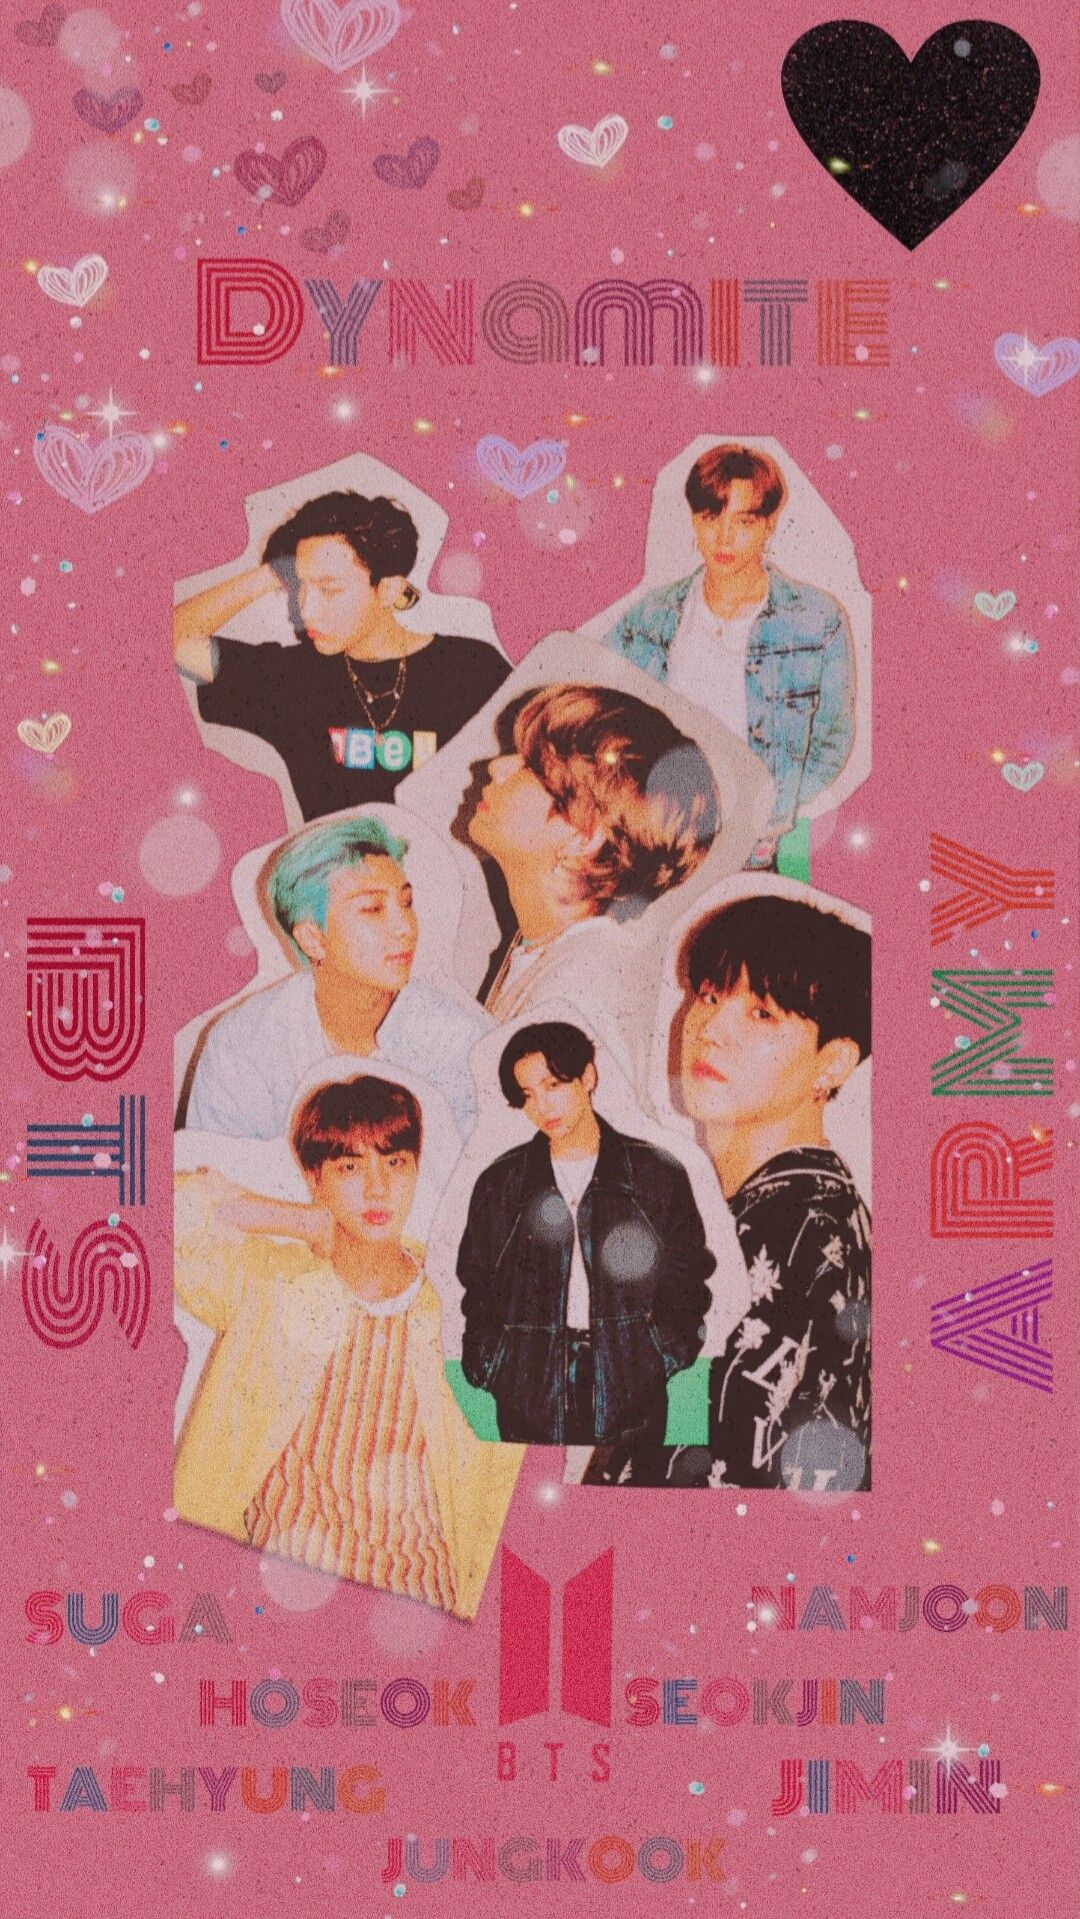 Pink Aesthetic Bts Iphone Wallpapers